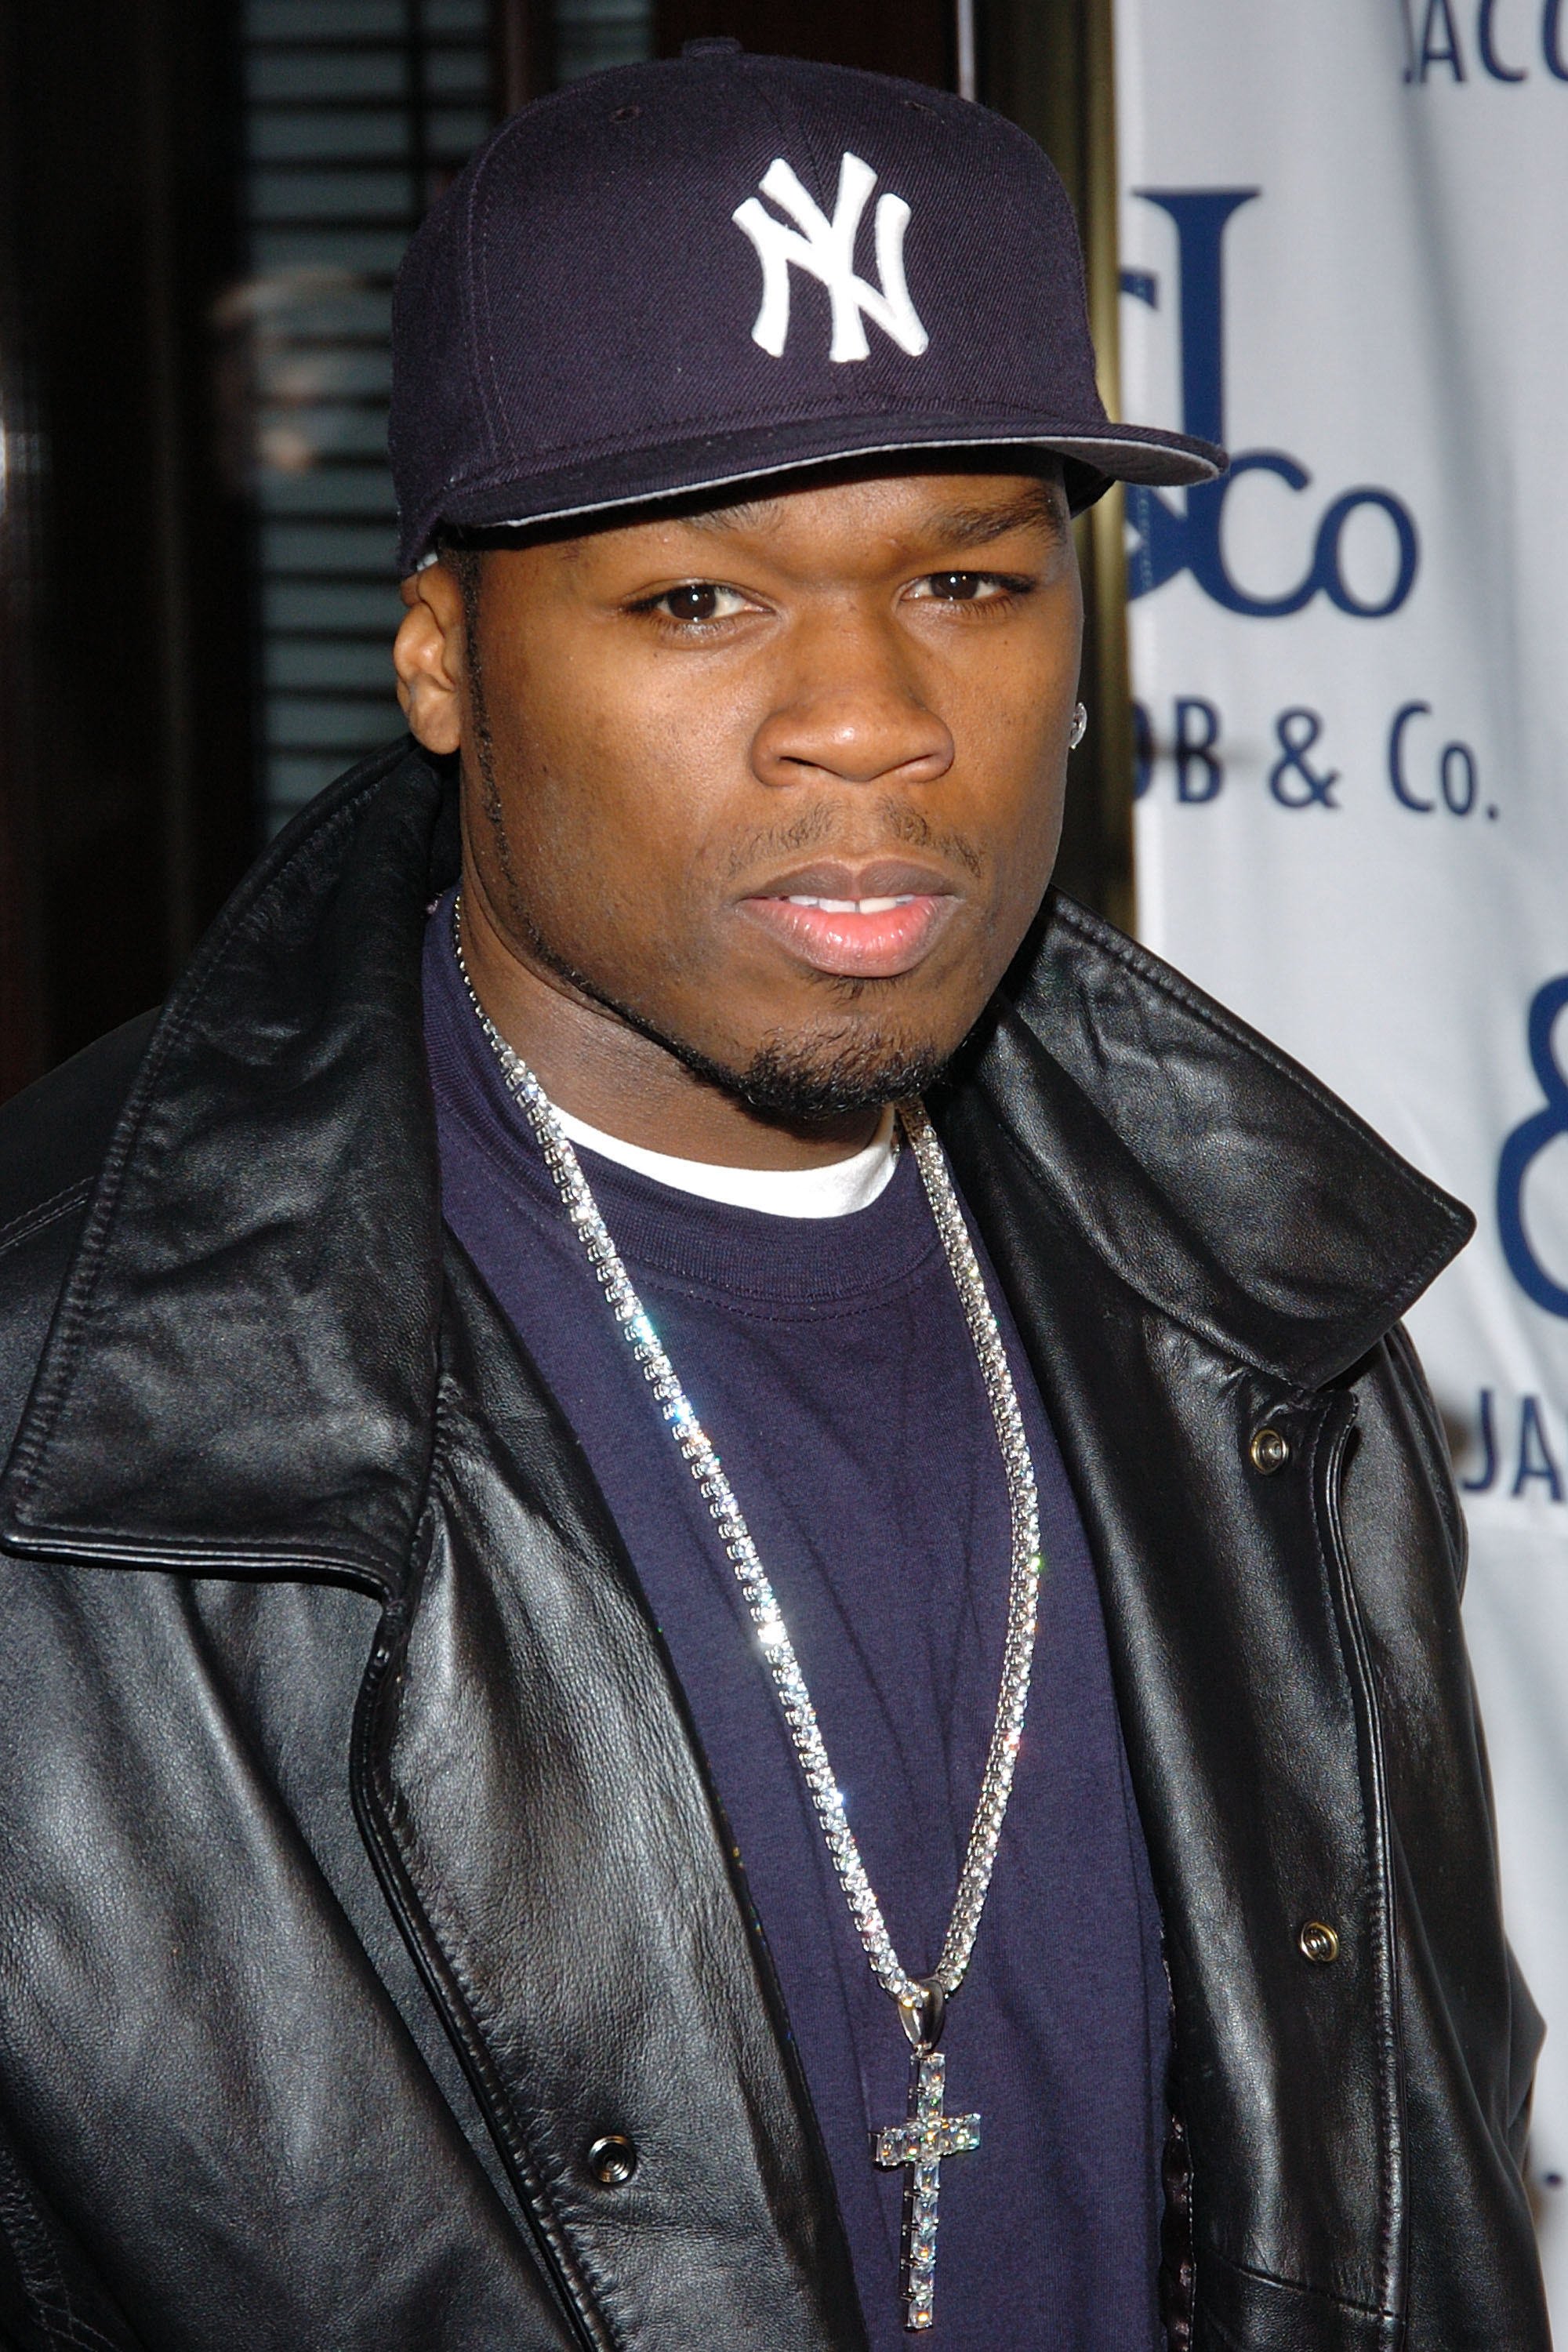 50 Cent at a fashion event in New York City in 2004